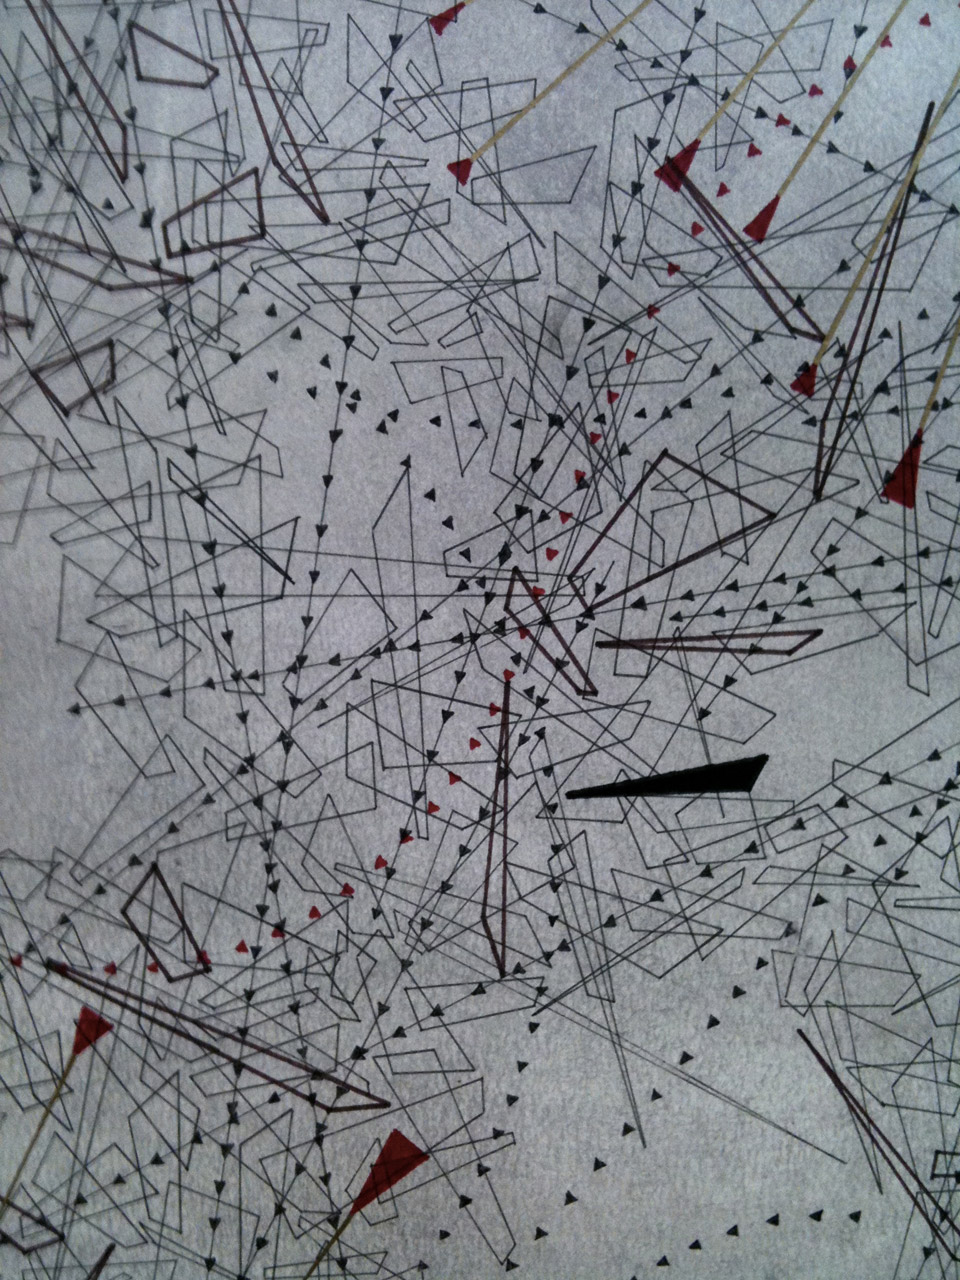 <p>We Will Follow (detail), 201, pen and ink, 250 x 150 cm</p>